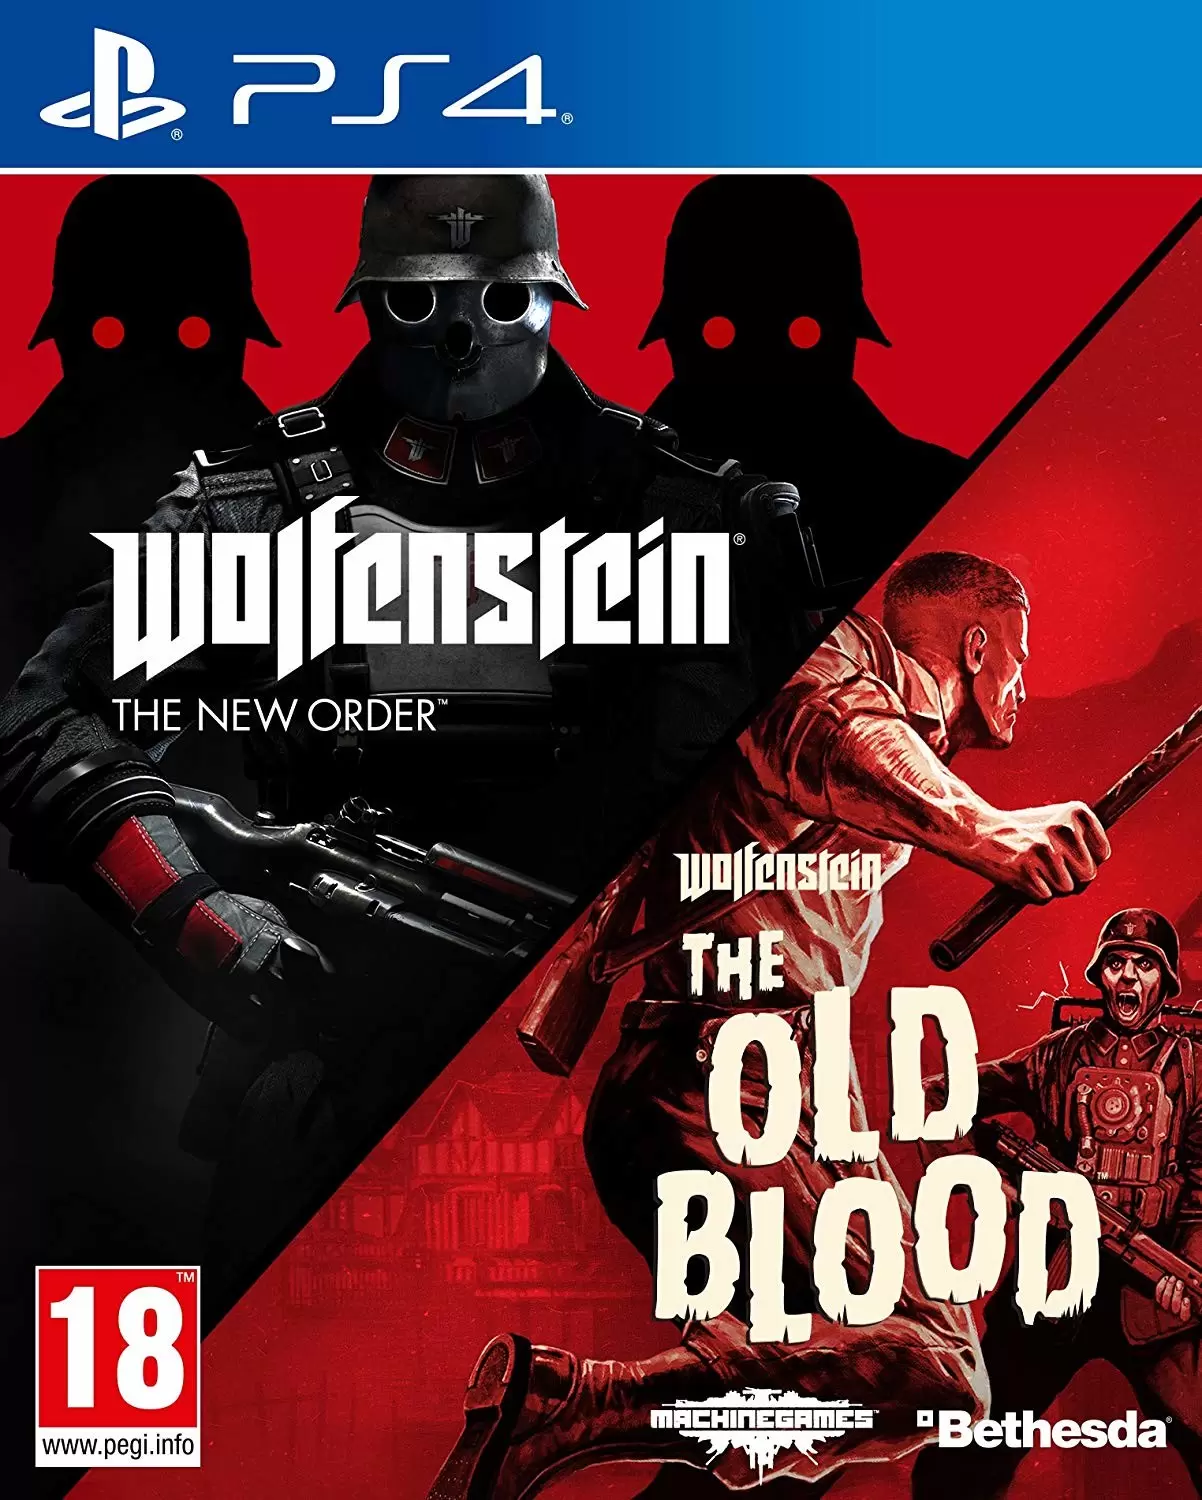 PS4 Games - Wolfenstein Double Pack : The New Order & The Old Blood